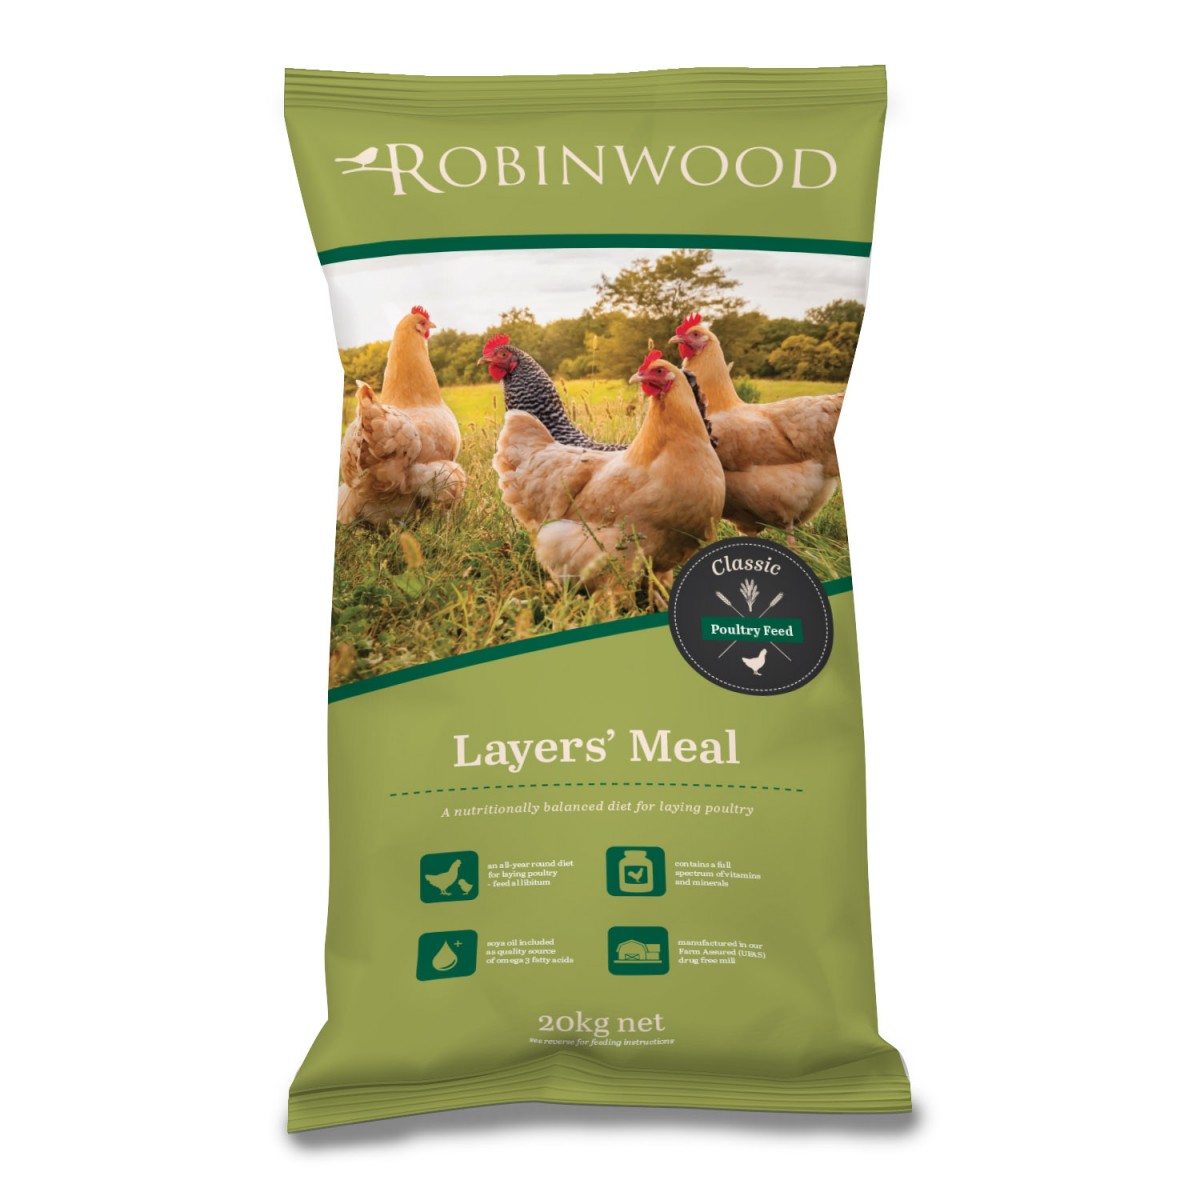 Layers Meal | Stephenson's Animal Feeds, Animal Feeds, Horse Feed, Game Feed,  Layers Pellets